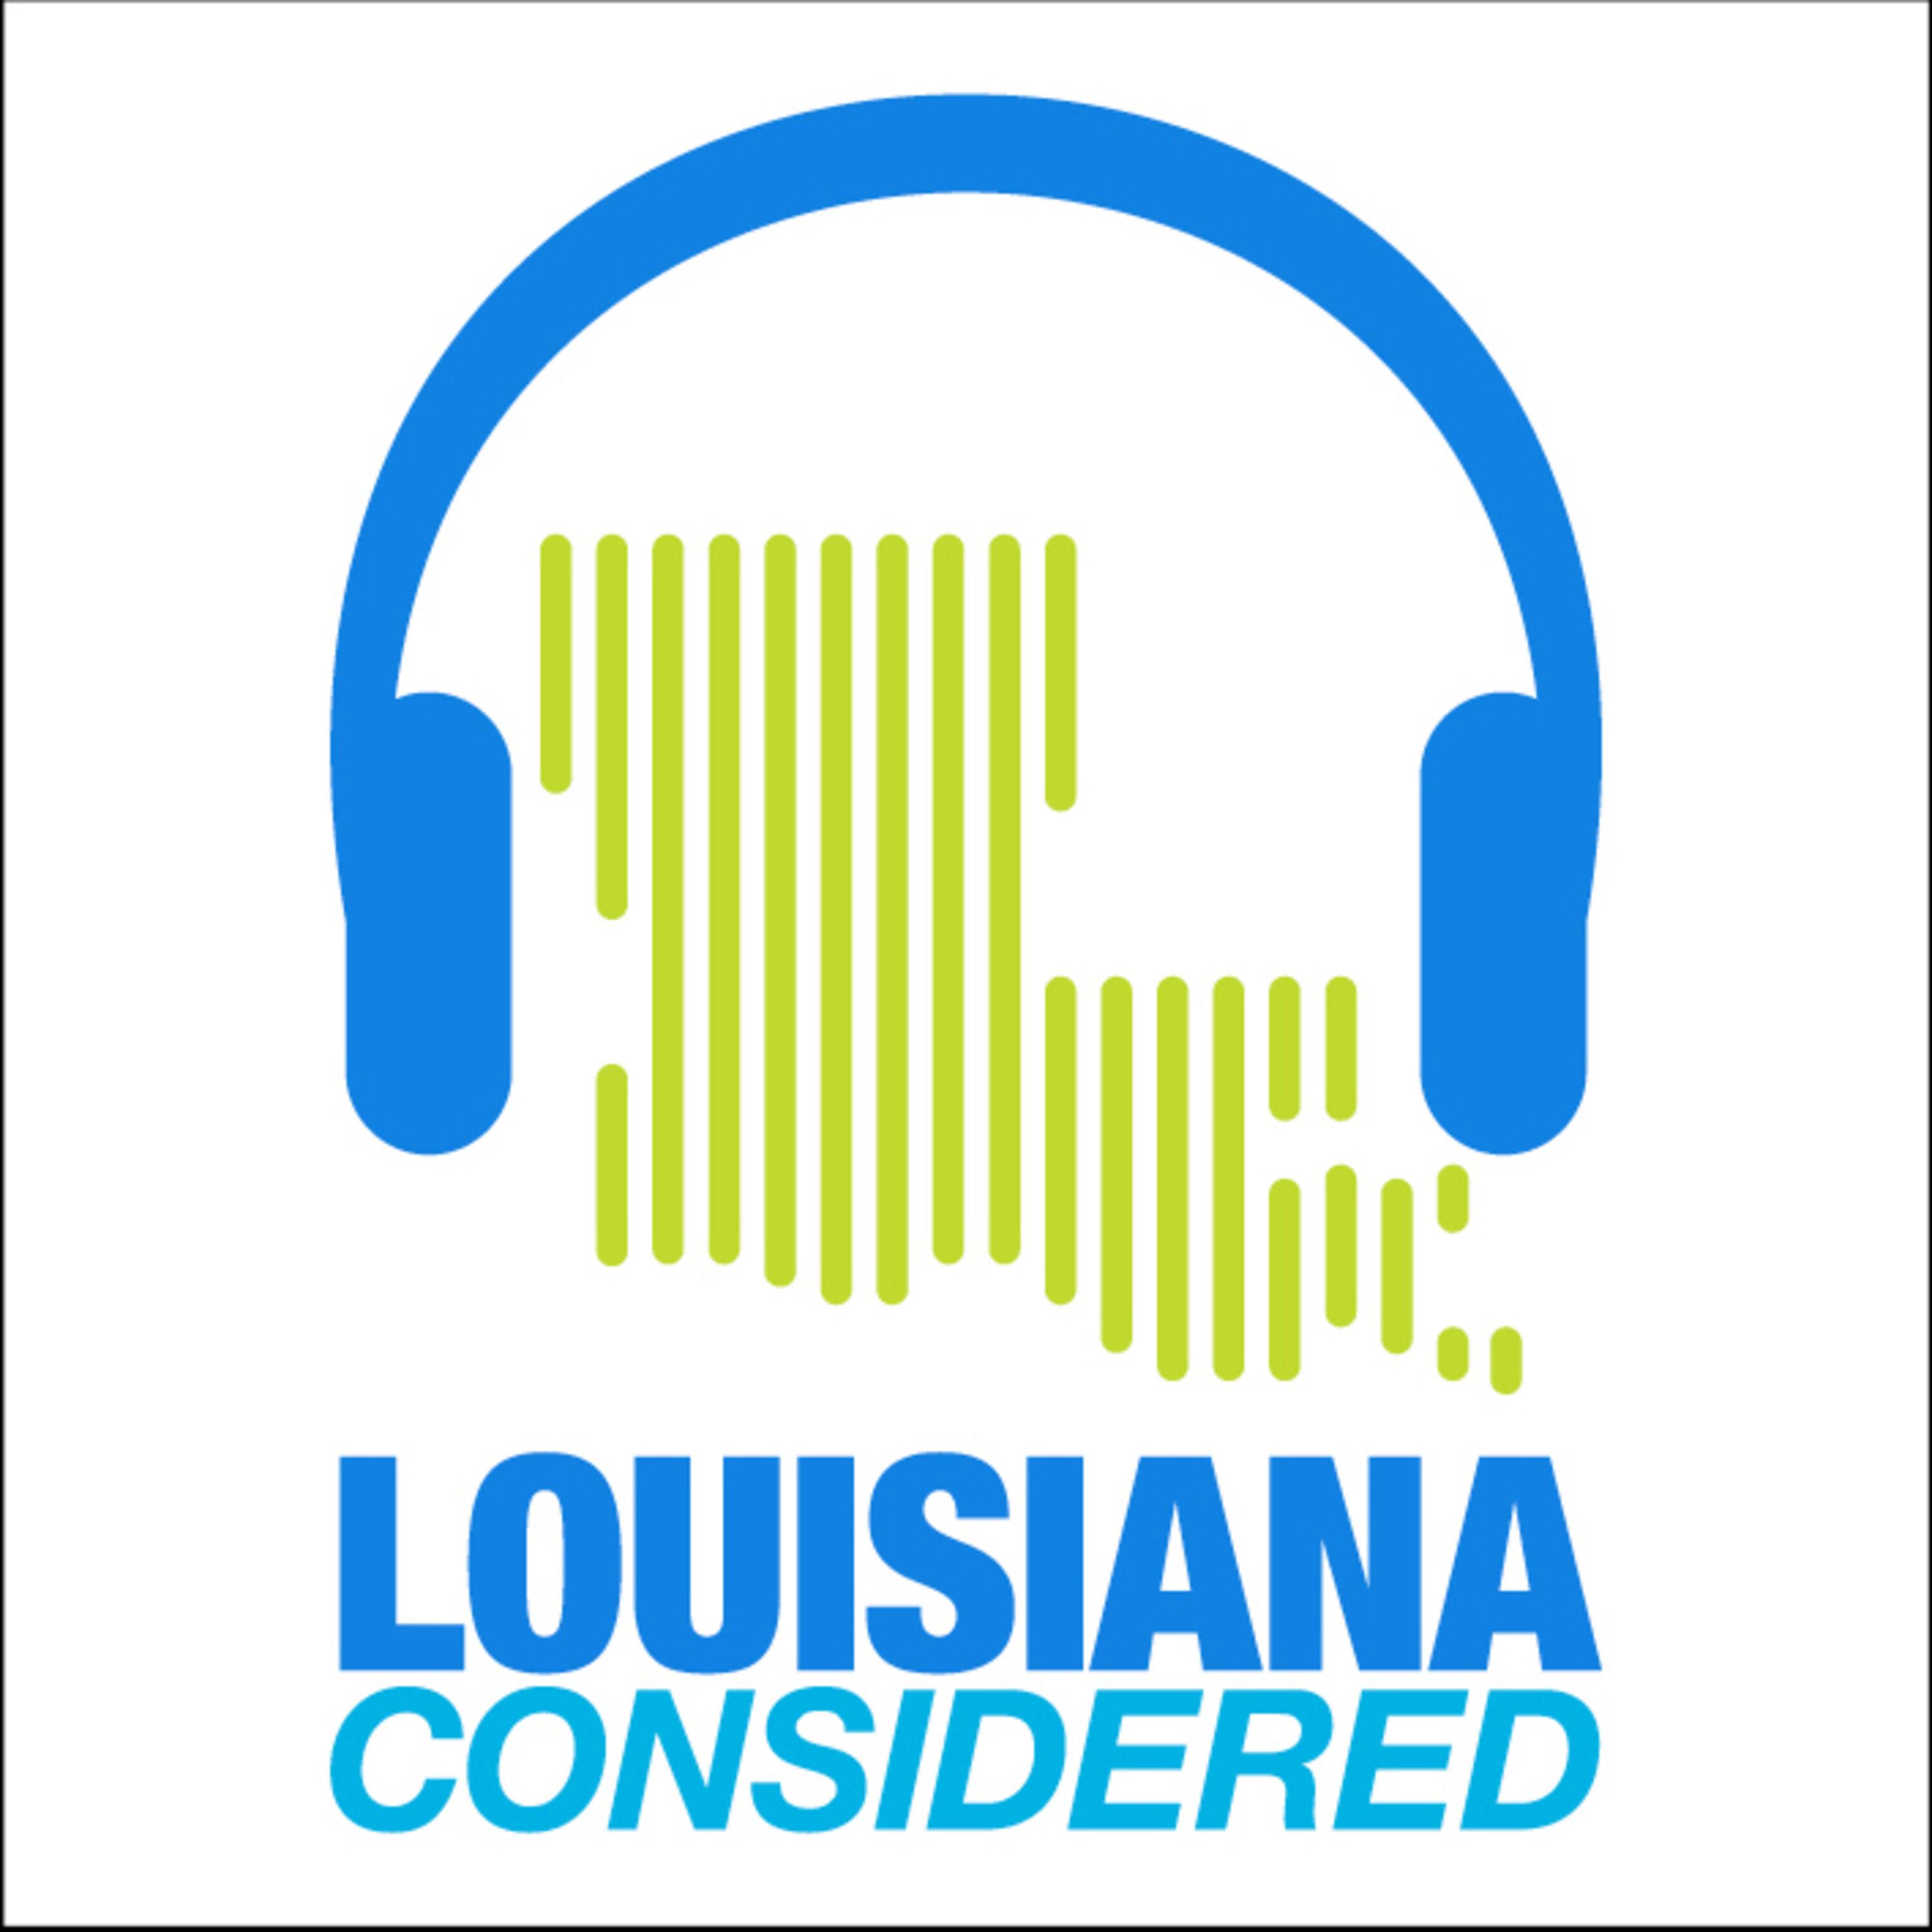 Thumbnail for "Louisiana Considered: Baton Rouge’s bus system is on the ballot and under scrutiny".